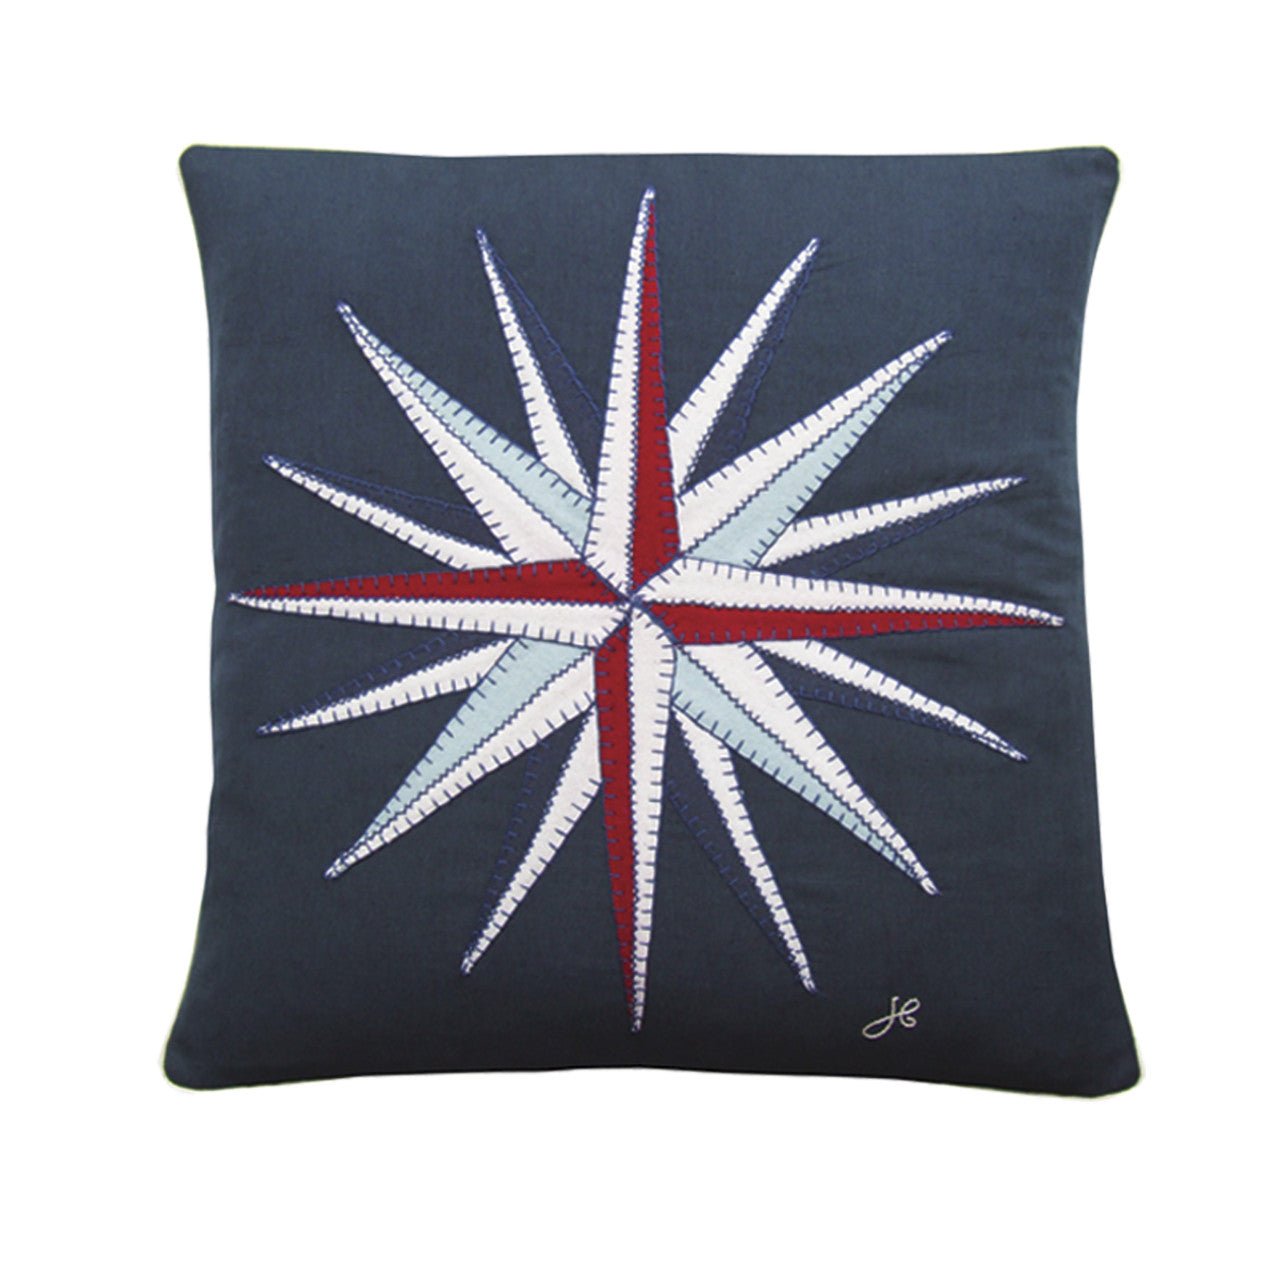 Jan Constantine compass hand-embroidered cushion.